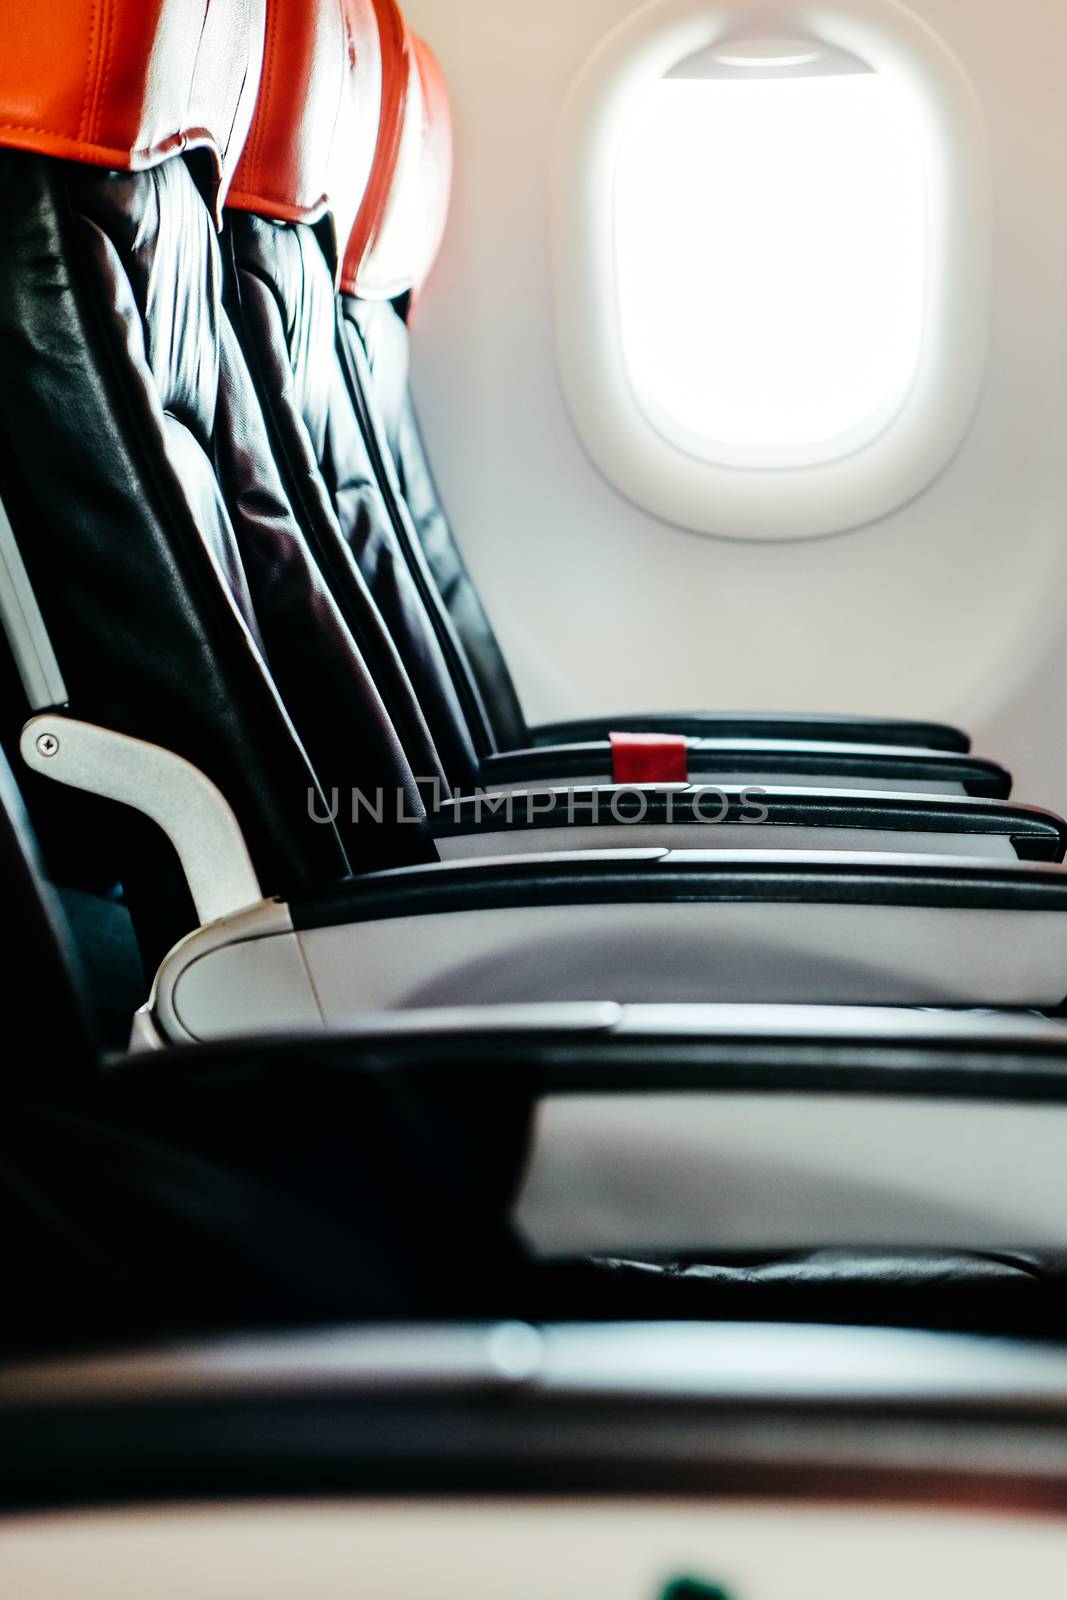 Seats in economy class section of airplane by ponsulak